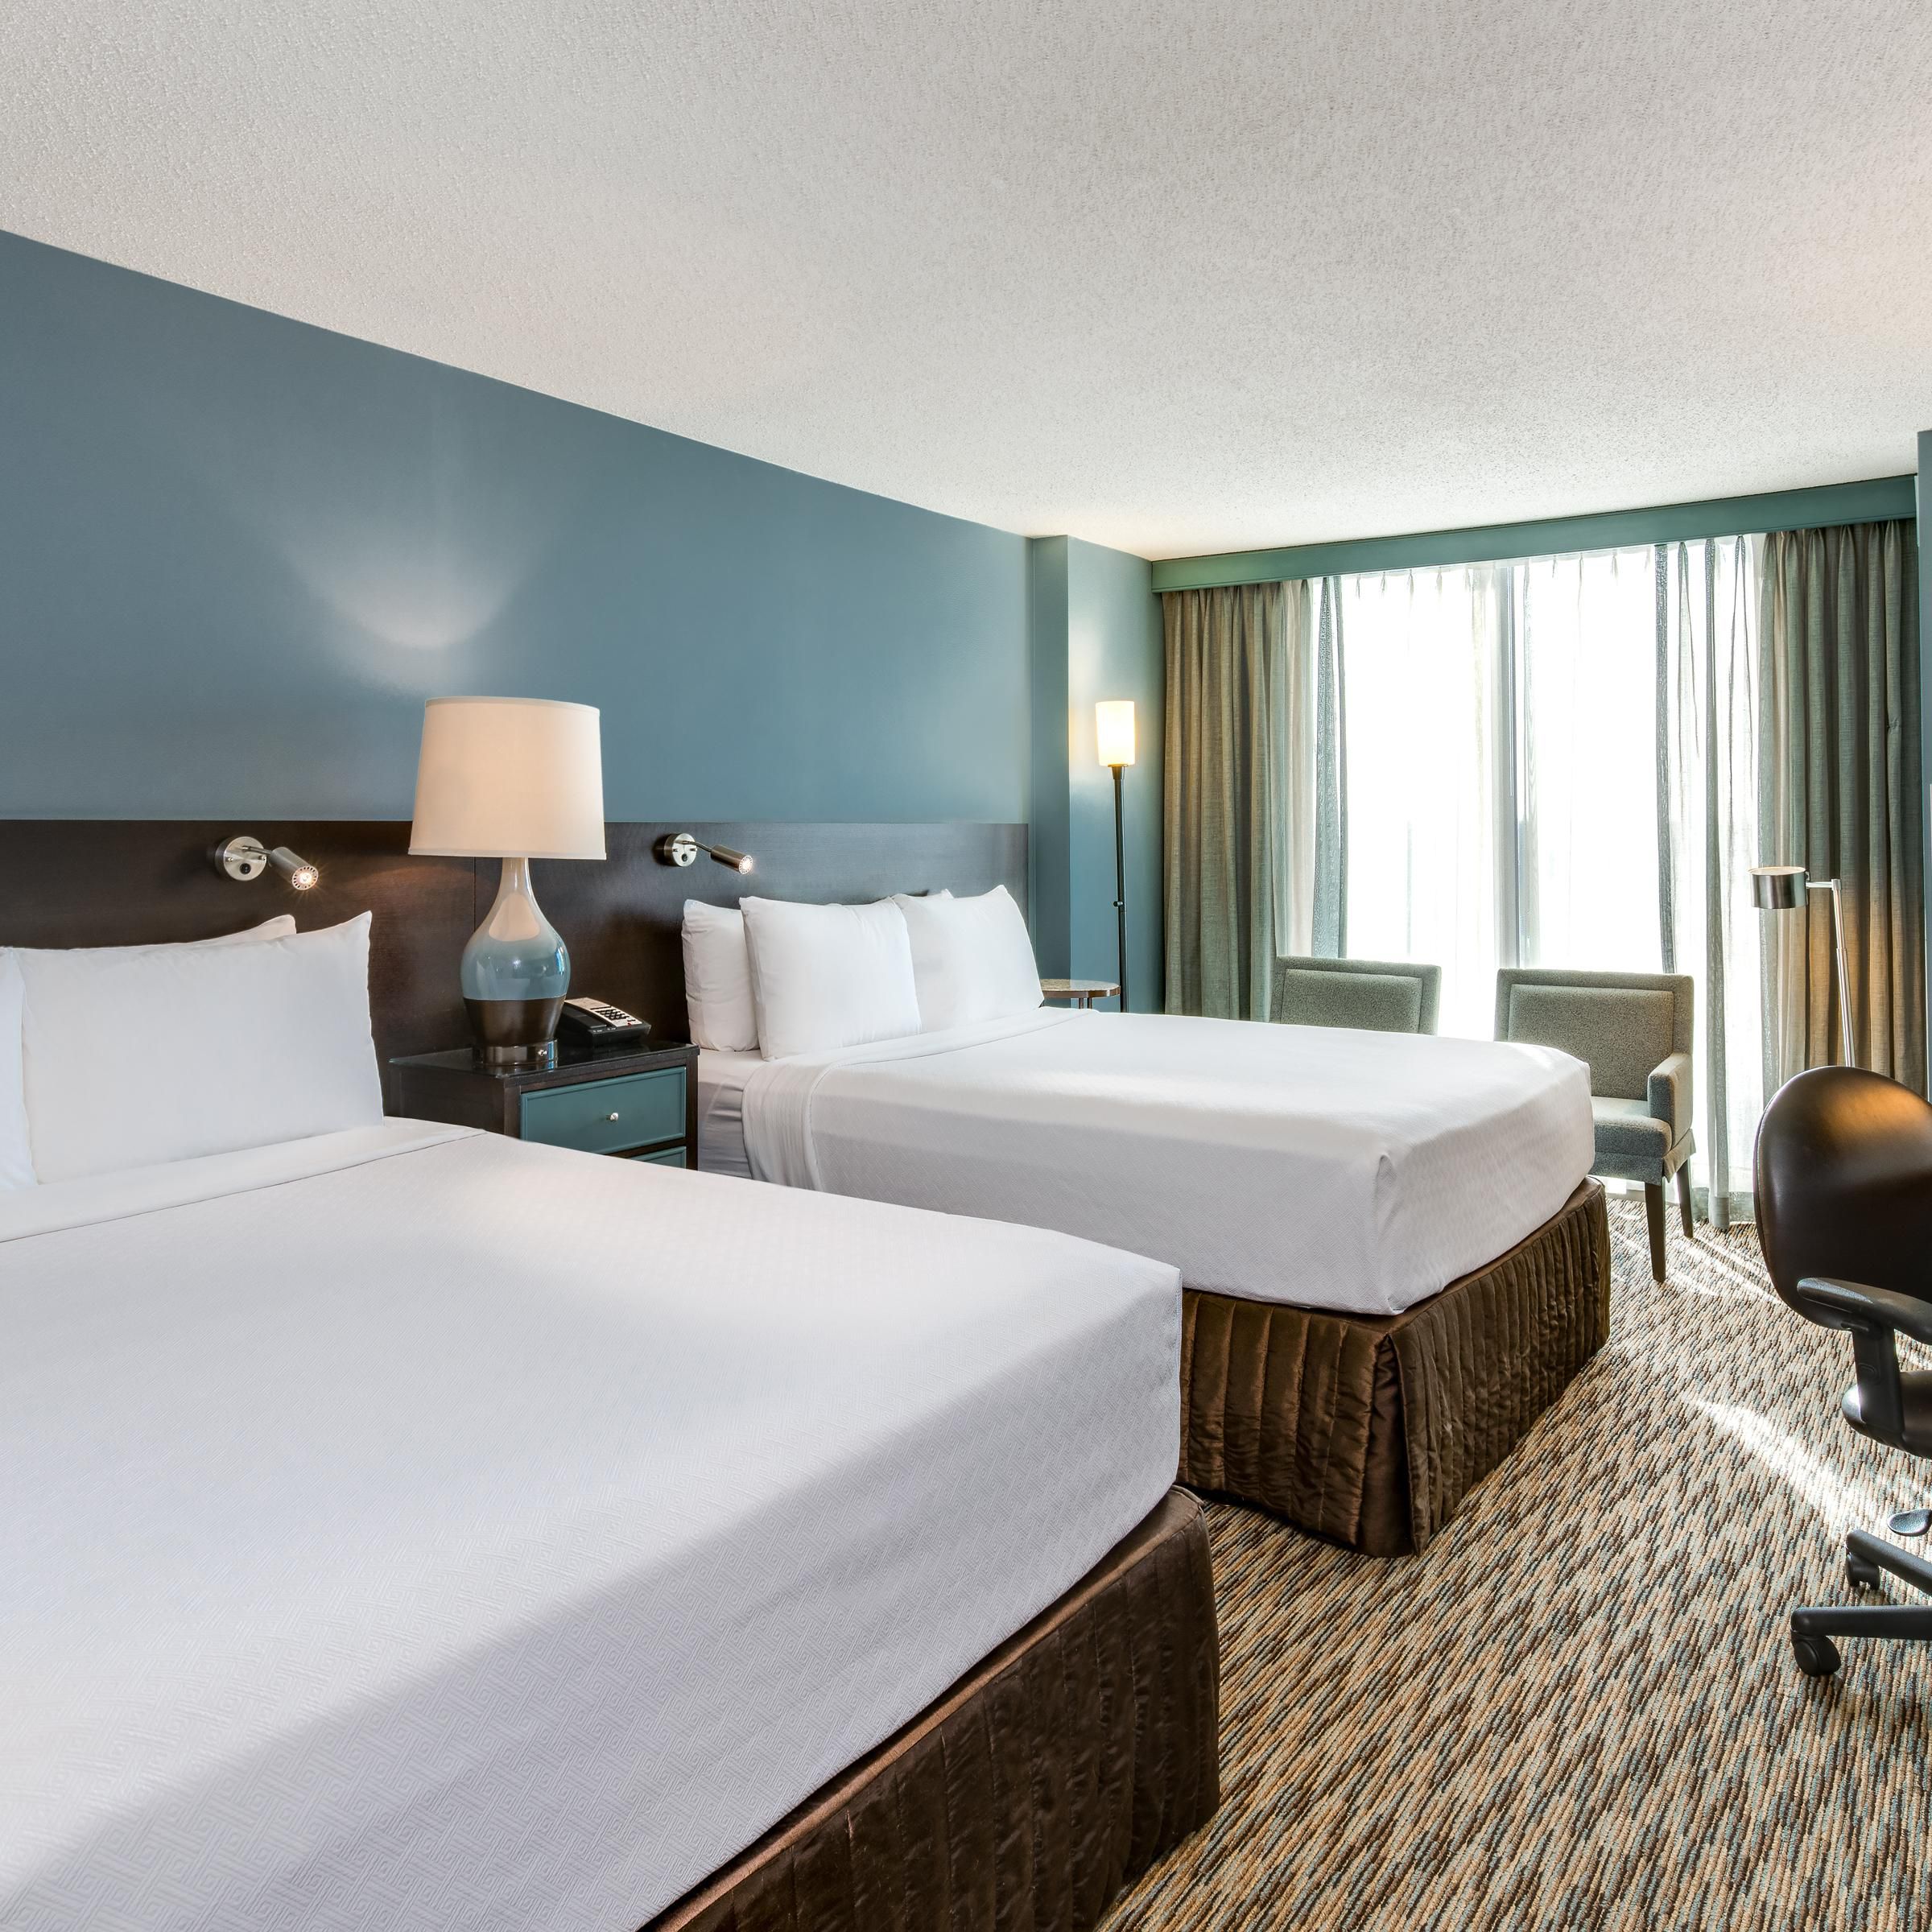 We take pride in making everything spotless for your arrival.